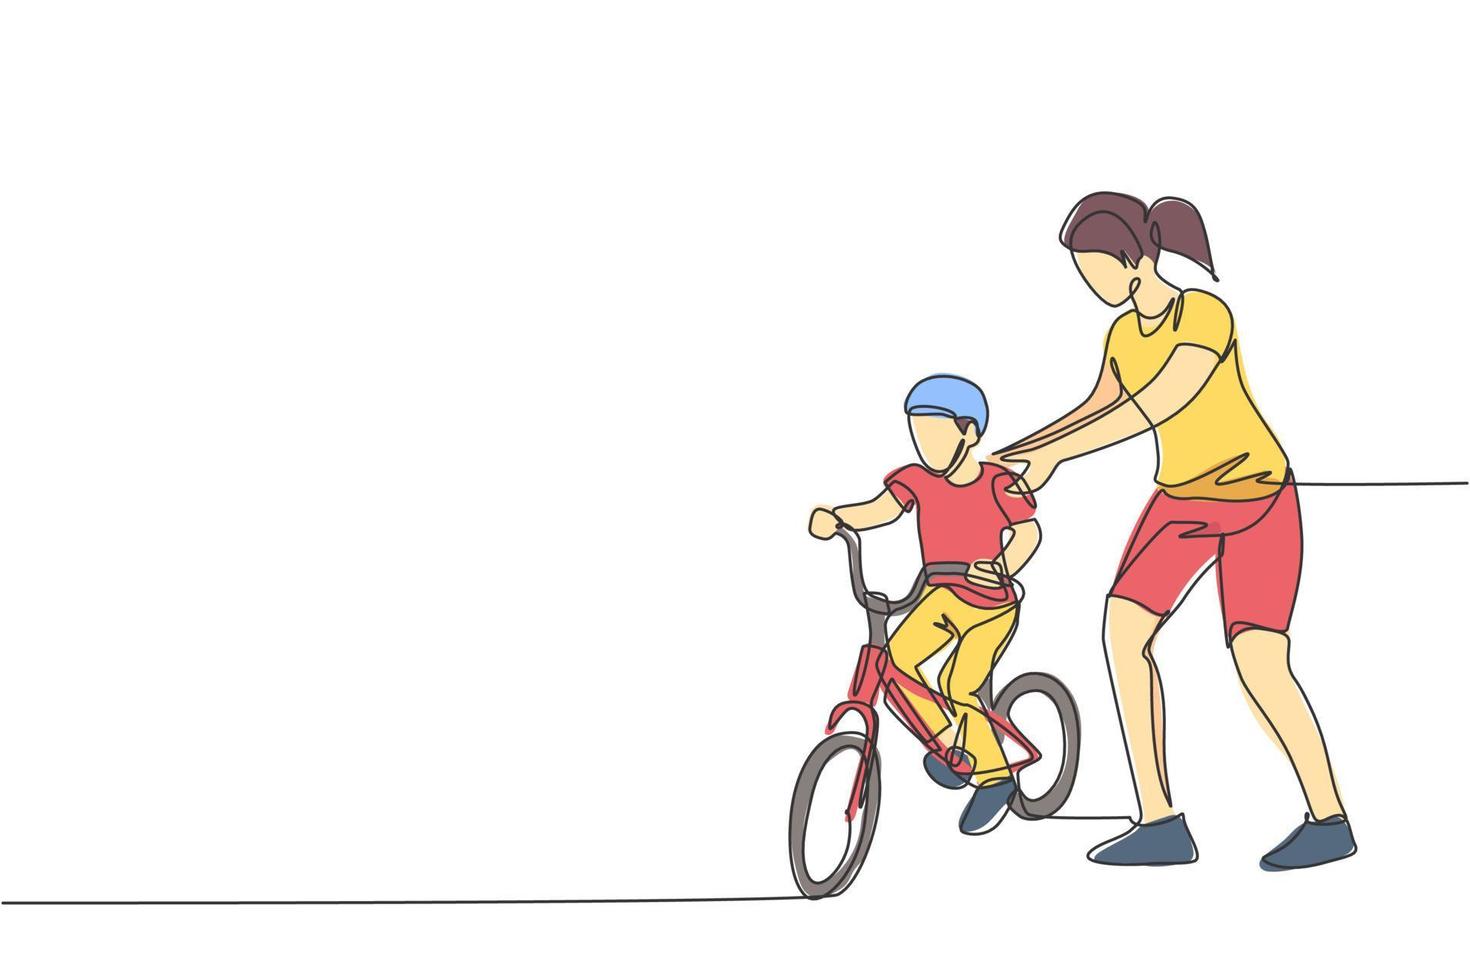 Single continuous line drawing of young kids boy learning ride bicycle with mother at outdoor park. Parenthood lesson. Family time concept. Trendy one line draw design vector graphic illustration